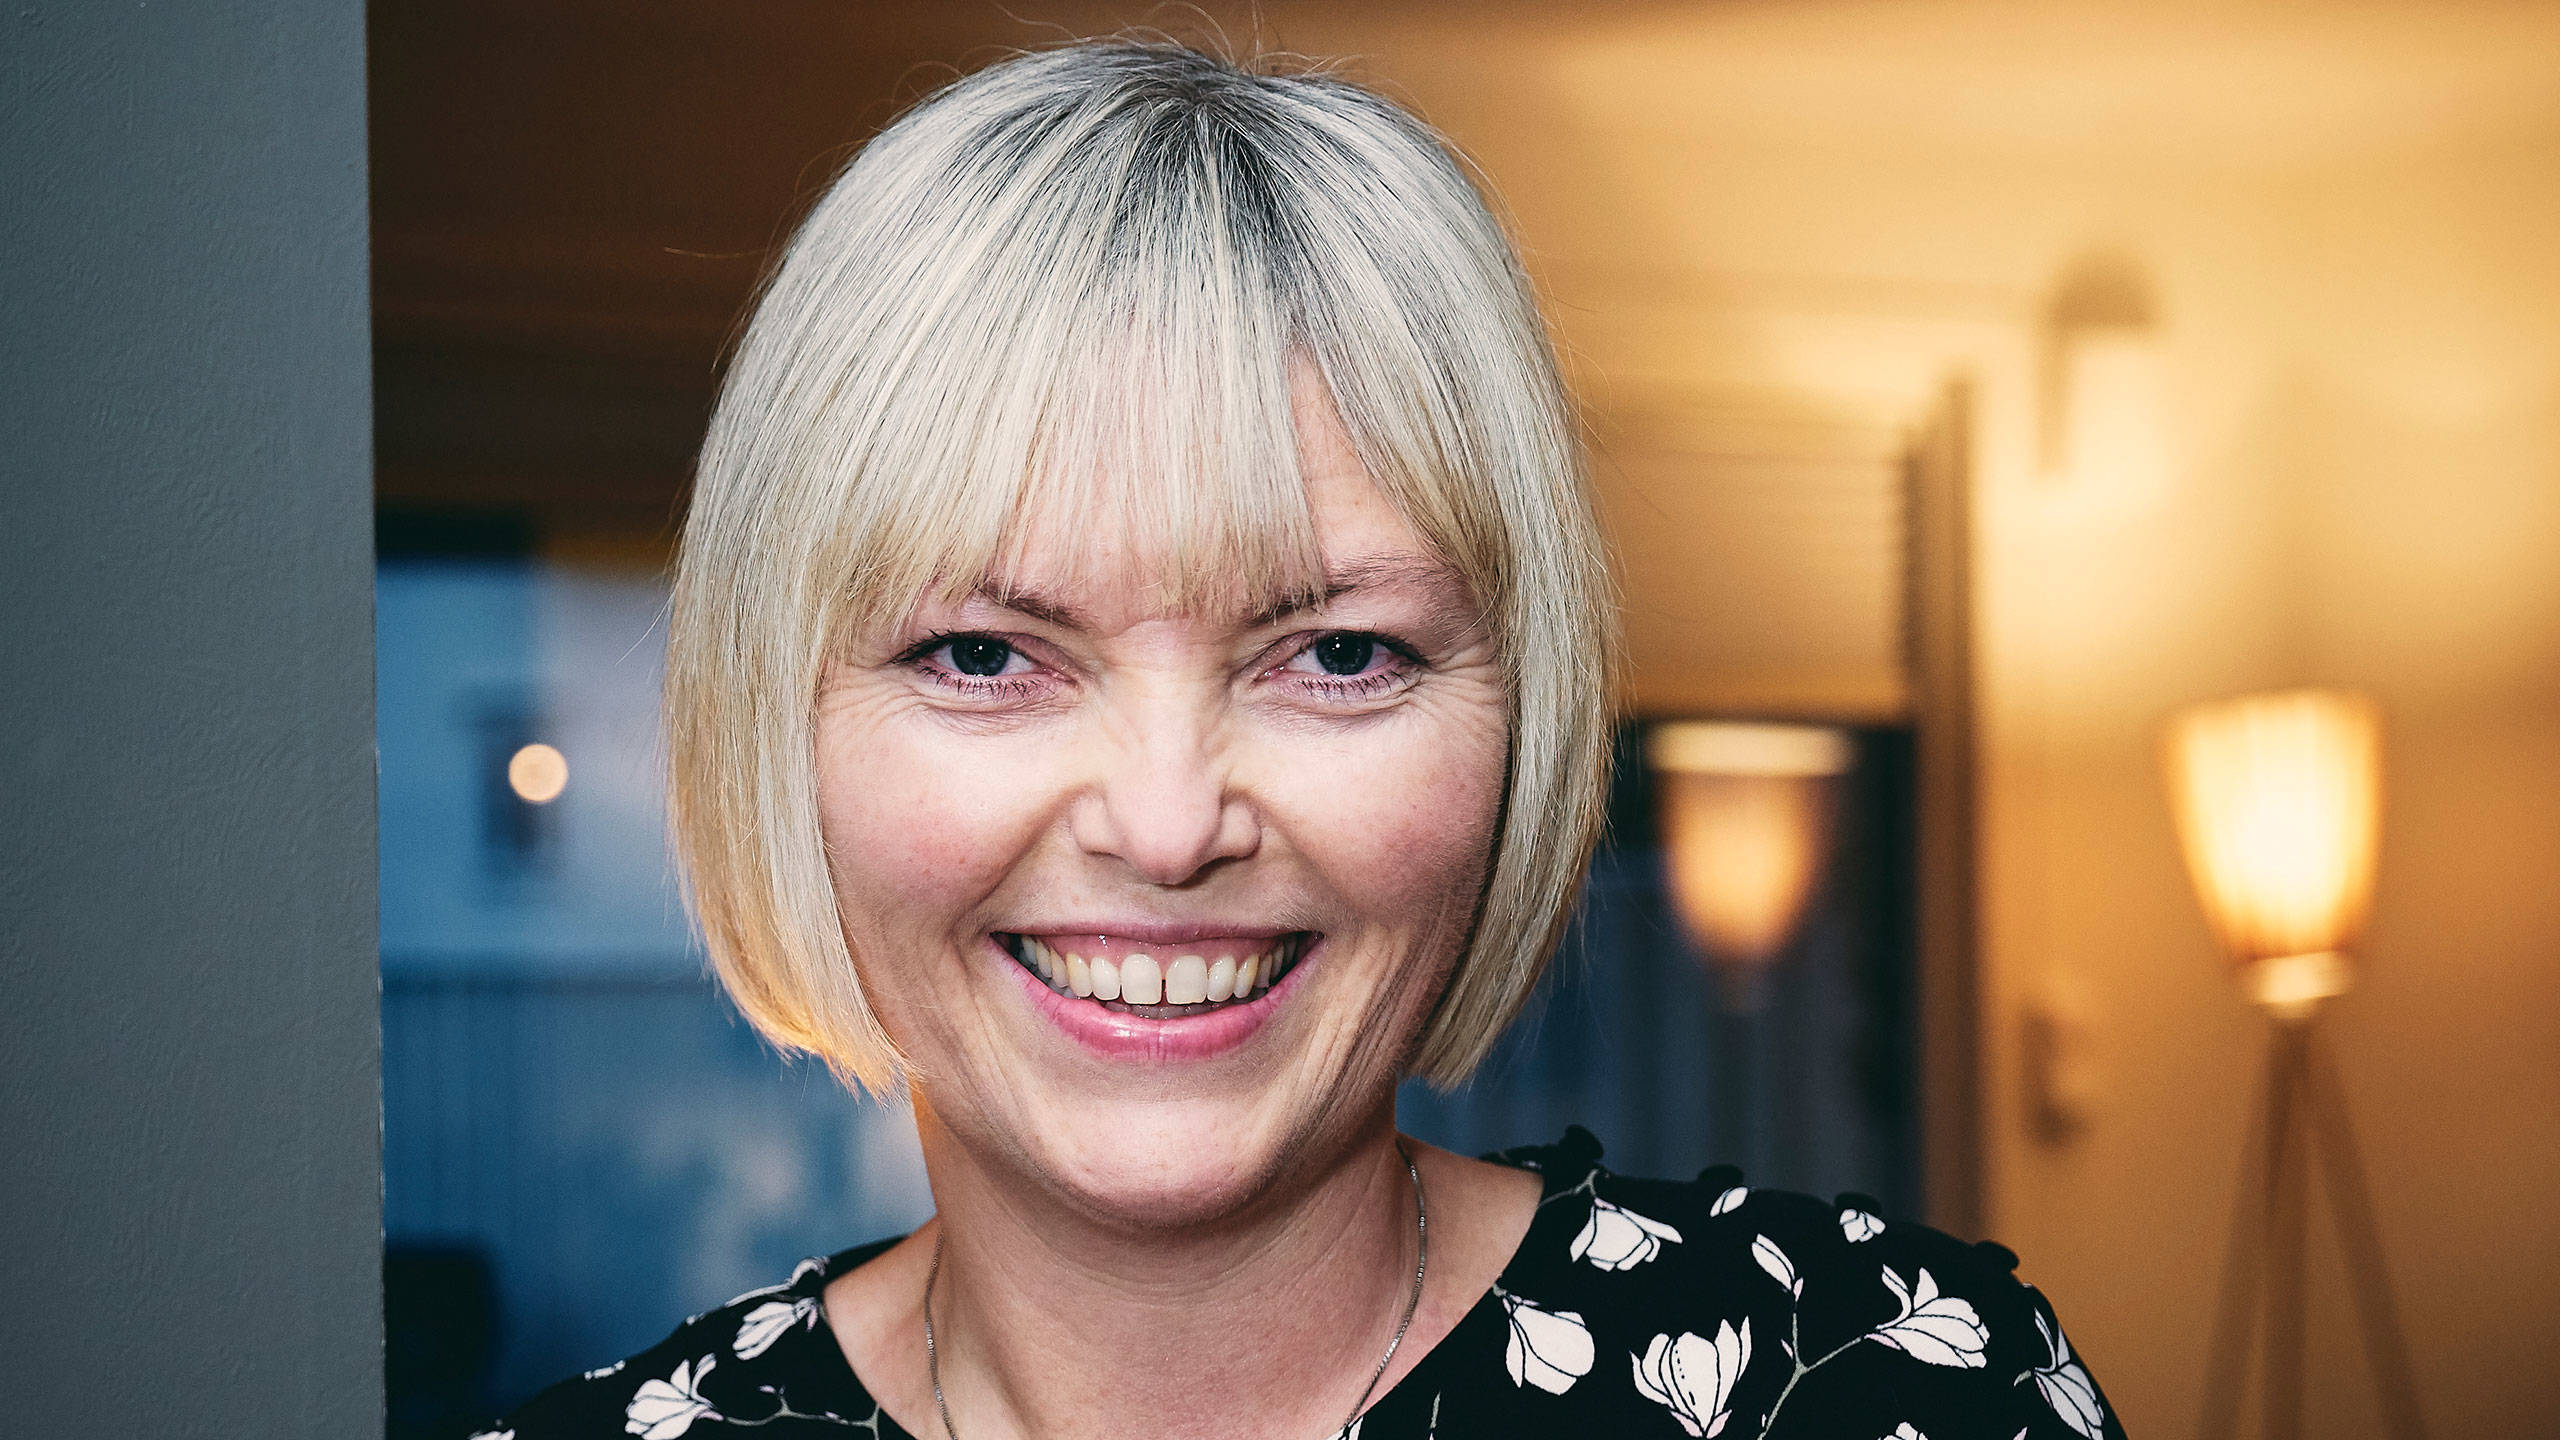 Norunn Folsvik is not afraid of diving into new challenges